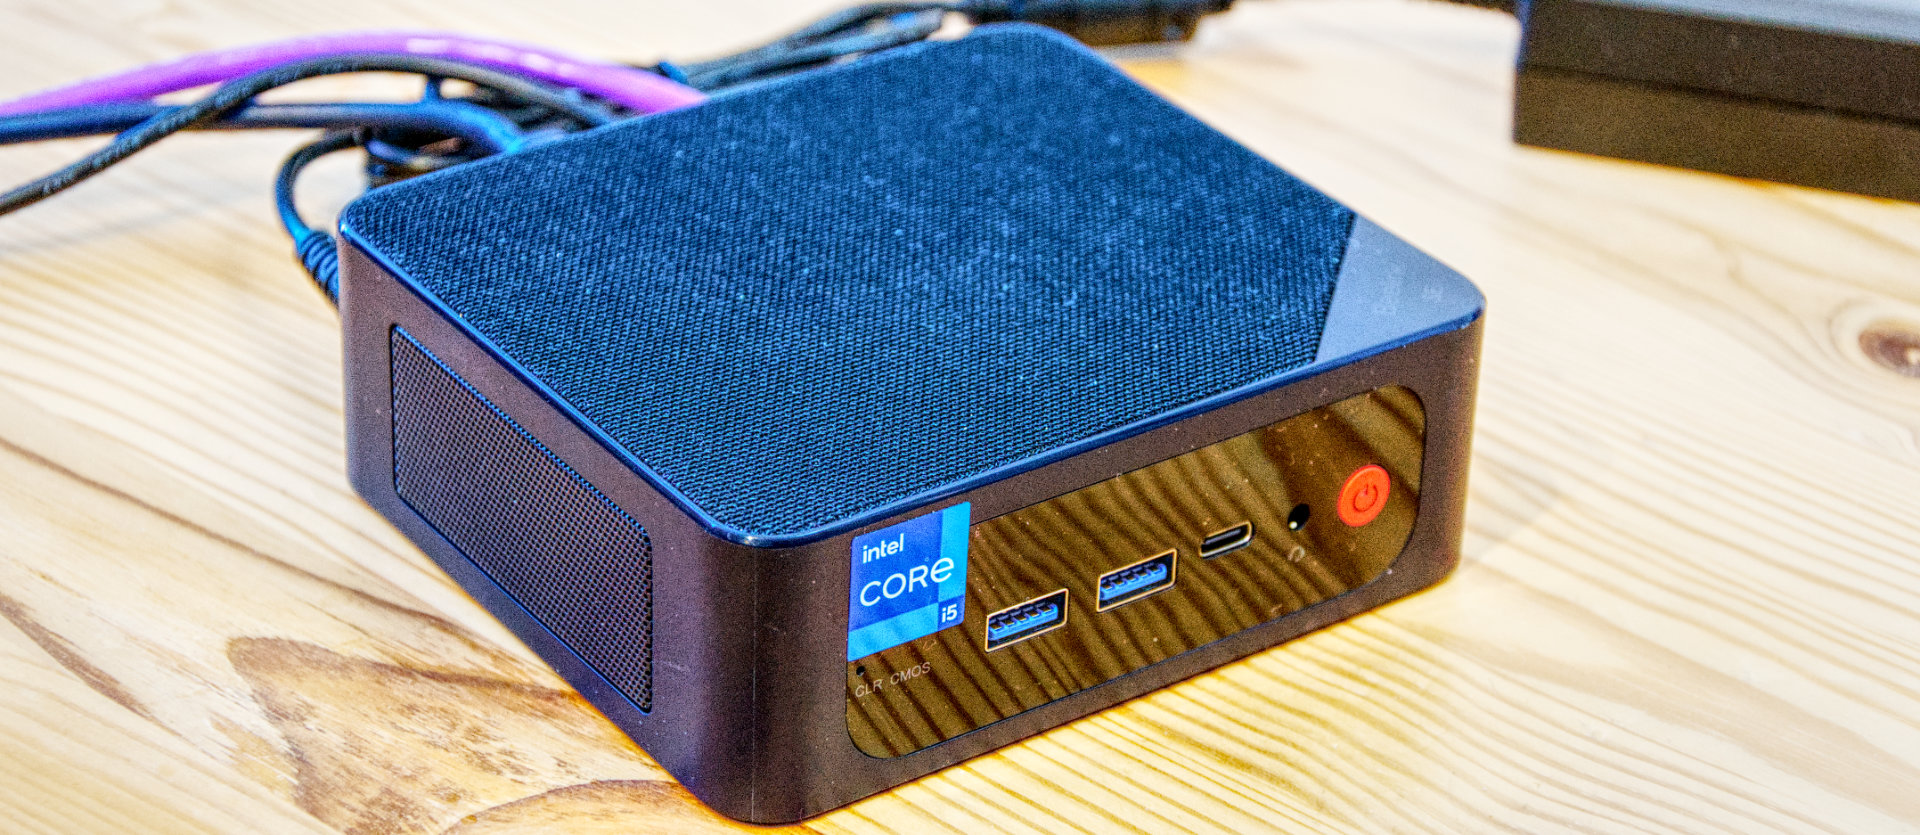 Beelink EQ 12 Mini PC Review: Is It The One? - Fossbytes